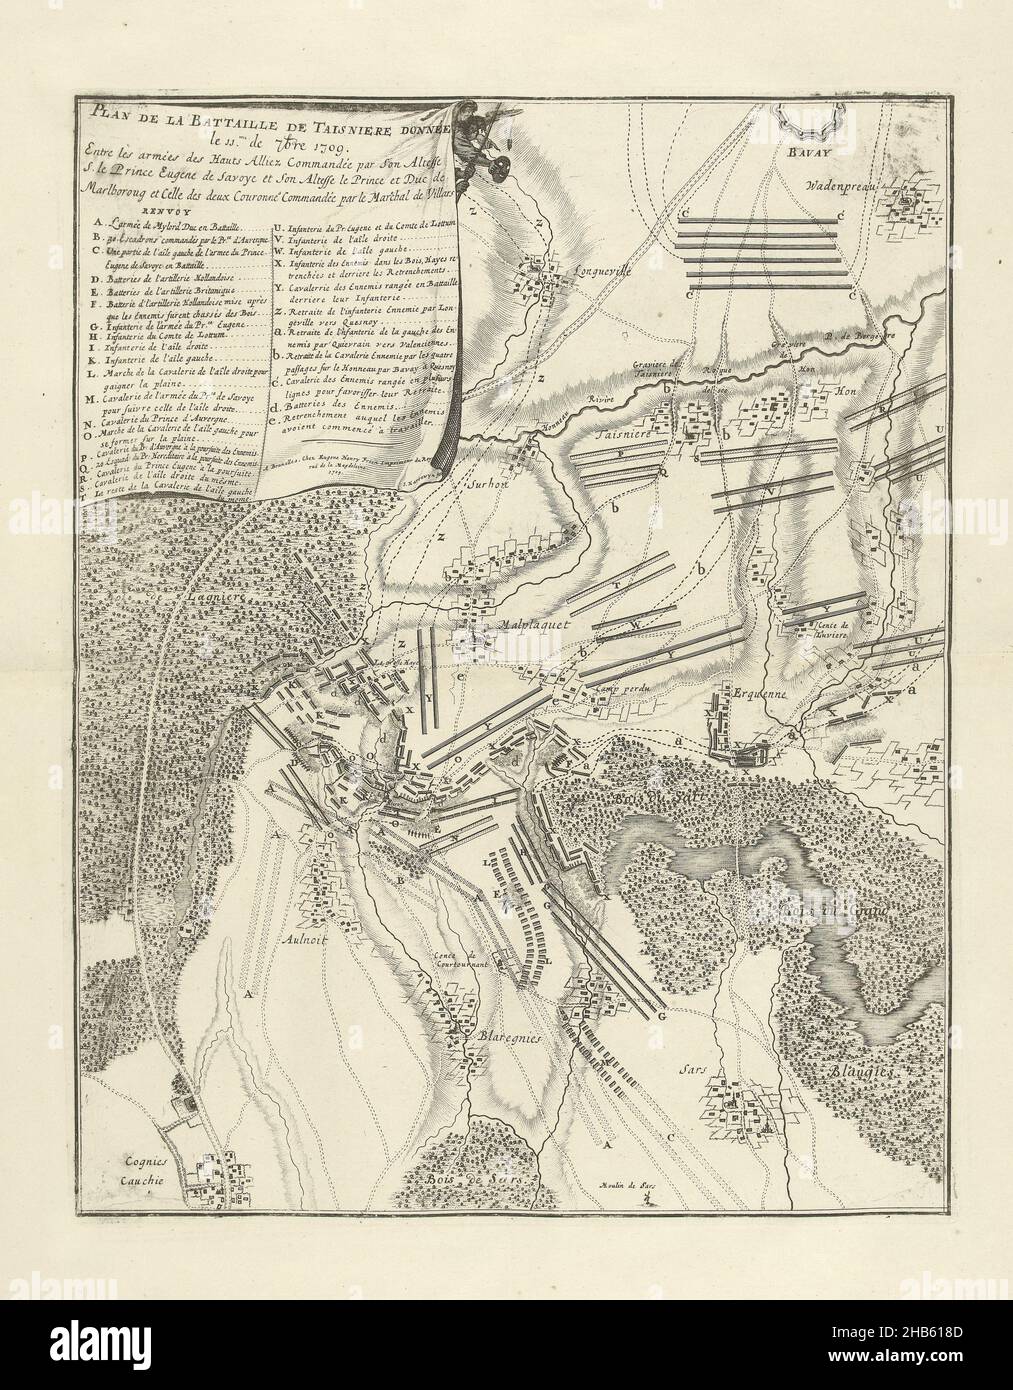 Battle of Malplaquet, 1709, Plan de la Bataille de Taisniere donnée le 11me de 7bre 1709 (title on object), Battle of Malplaquet, between the Allies under Duke of Marlborough and Prince of Savoy and the French, September 11, 1709. Top left drapery with the title and legend A-e in French. Part of a bundled collection of plans of battles and cities renowned in the War of the Spanish Succession., print maker: Jacobus Harrewijn (mentioned on object), publisher: Eugene Henry Fricx (mentioned on object), Brussels, 1709, paper, etching, engraving, height 465 mm × width 370 mm Stock Photo